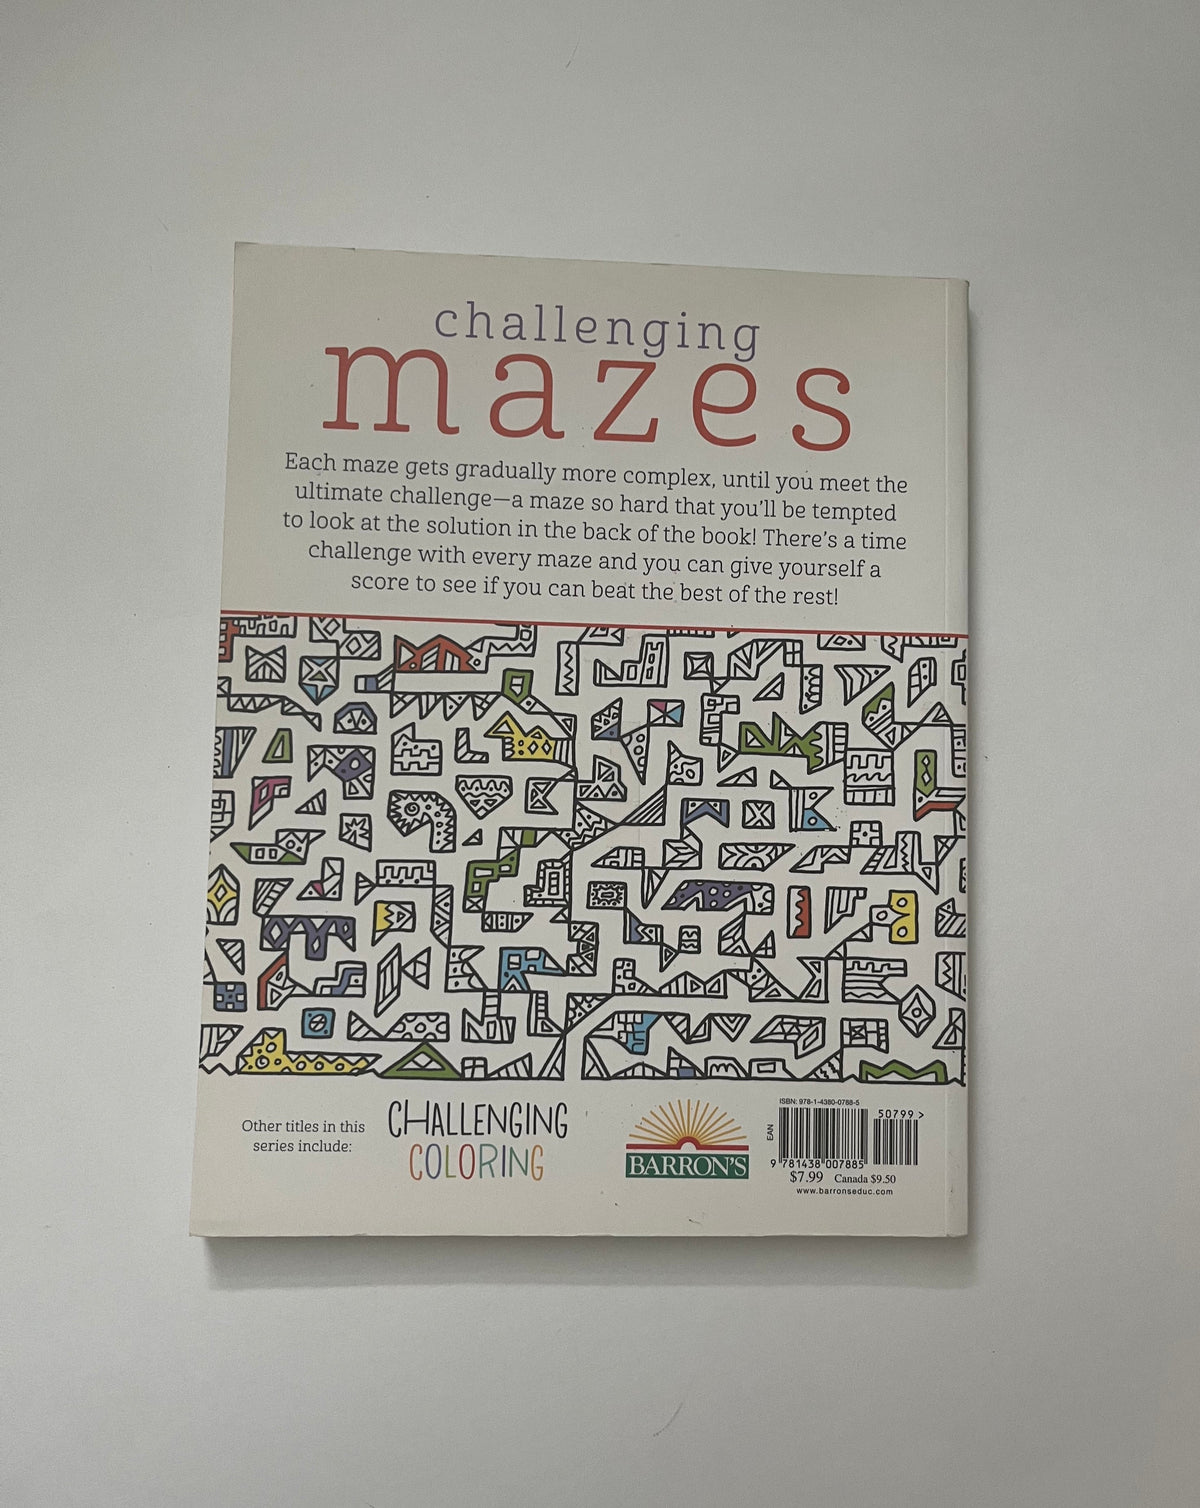 Challenging Mazes: 80 Timed Mazes to Test Your Skill